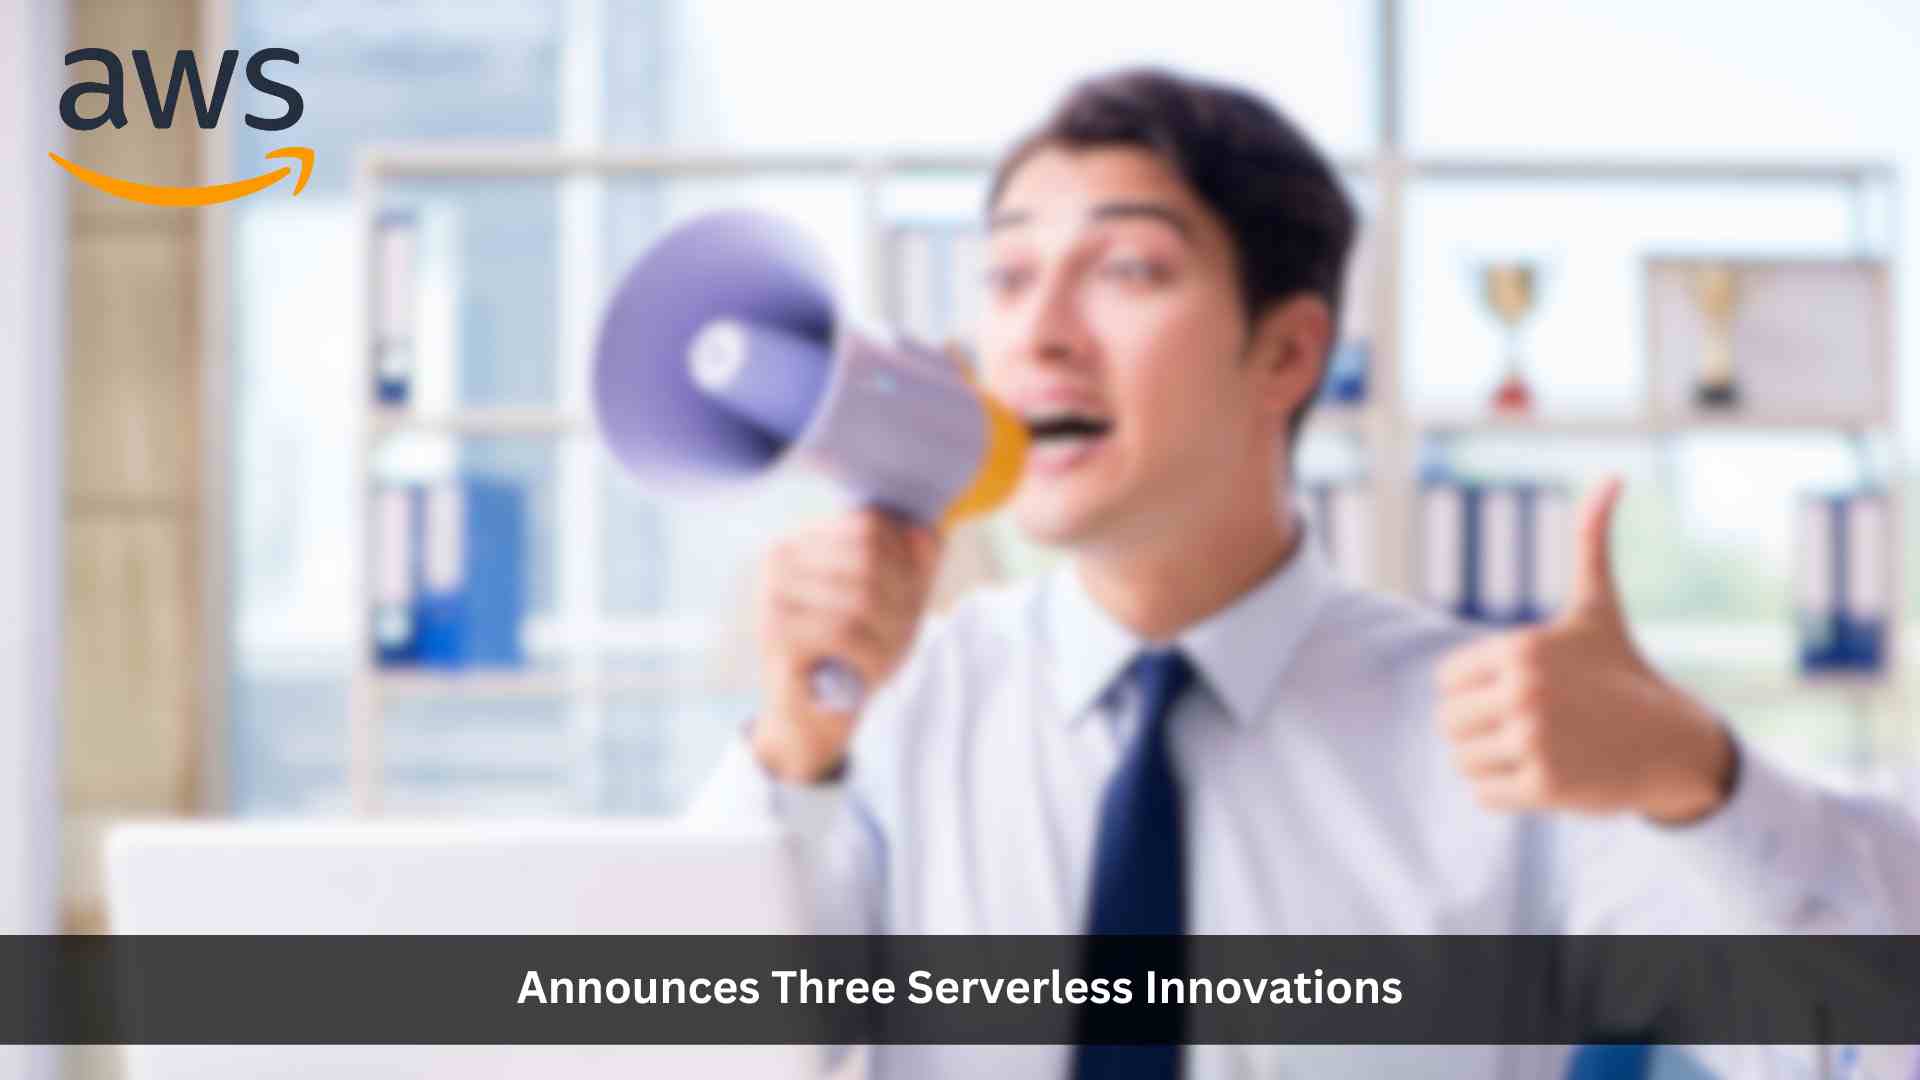 AWS Announces Three Serverless Innovations to Help Customers Analyze and Manage Data at Any Scale